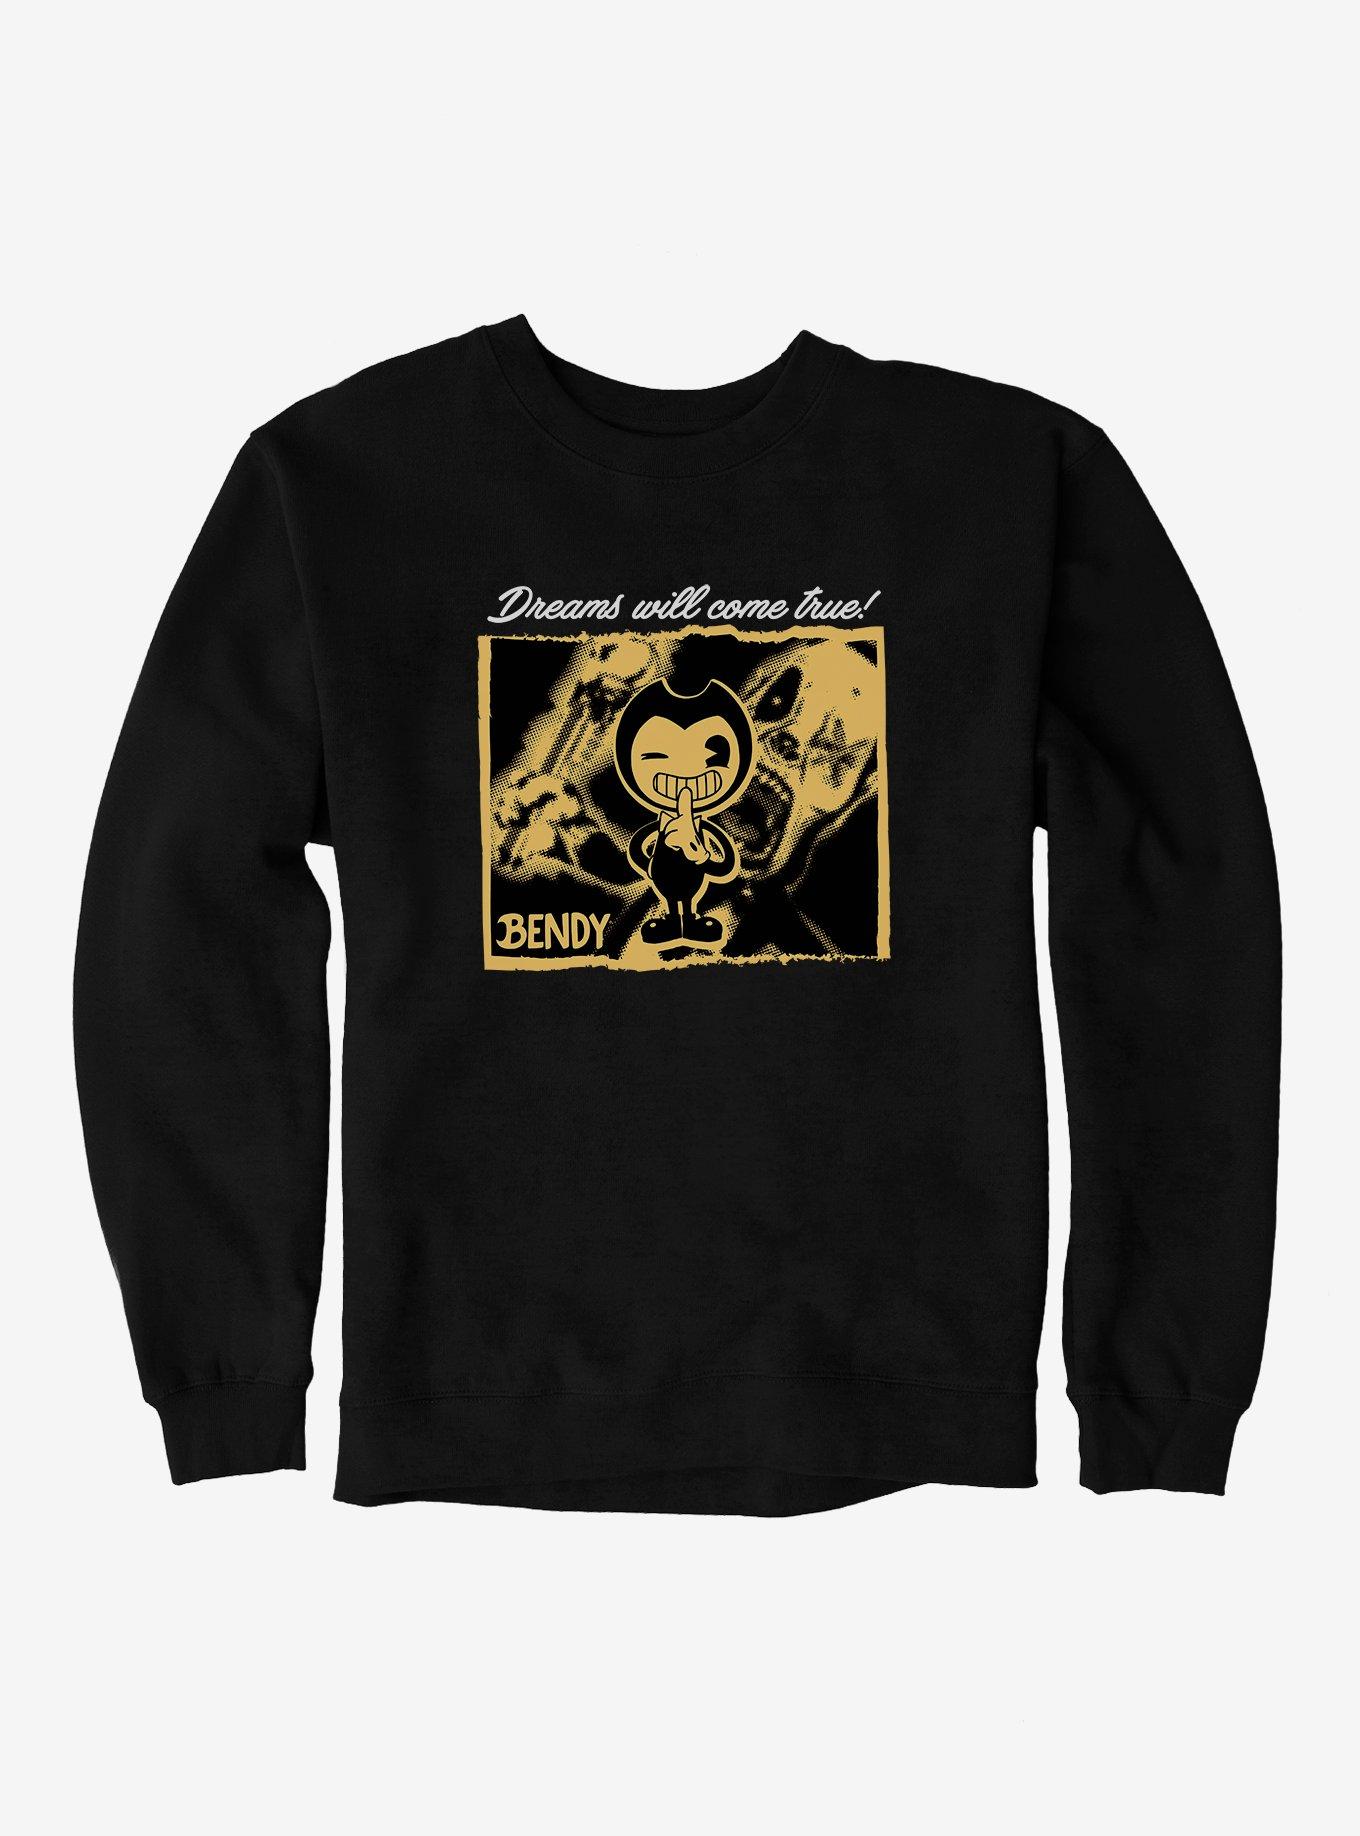 Bendy And The Ink Machine Dreams Will Come True! Sweatshirt | Hot Topic